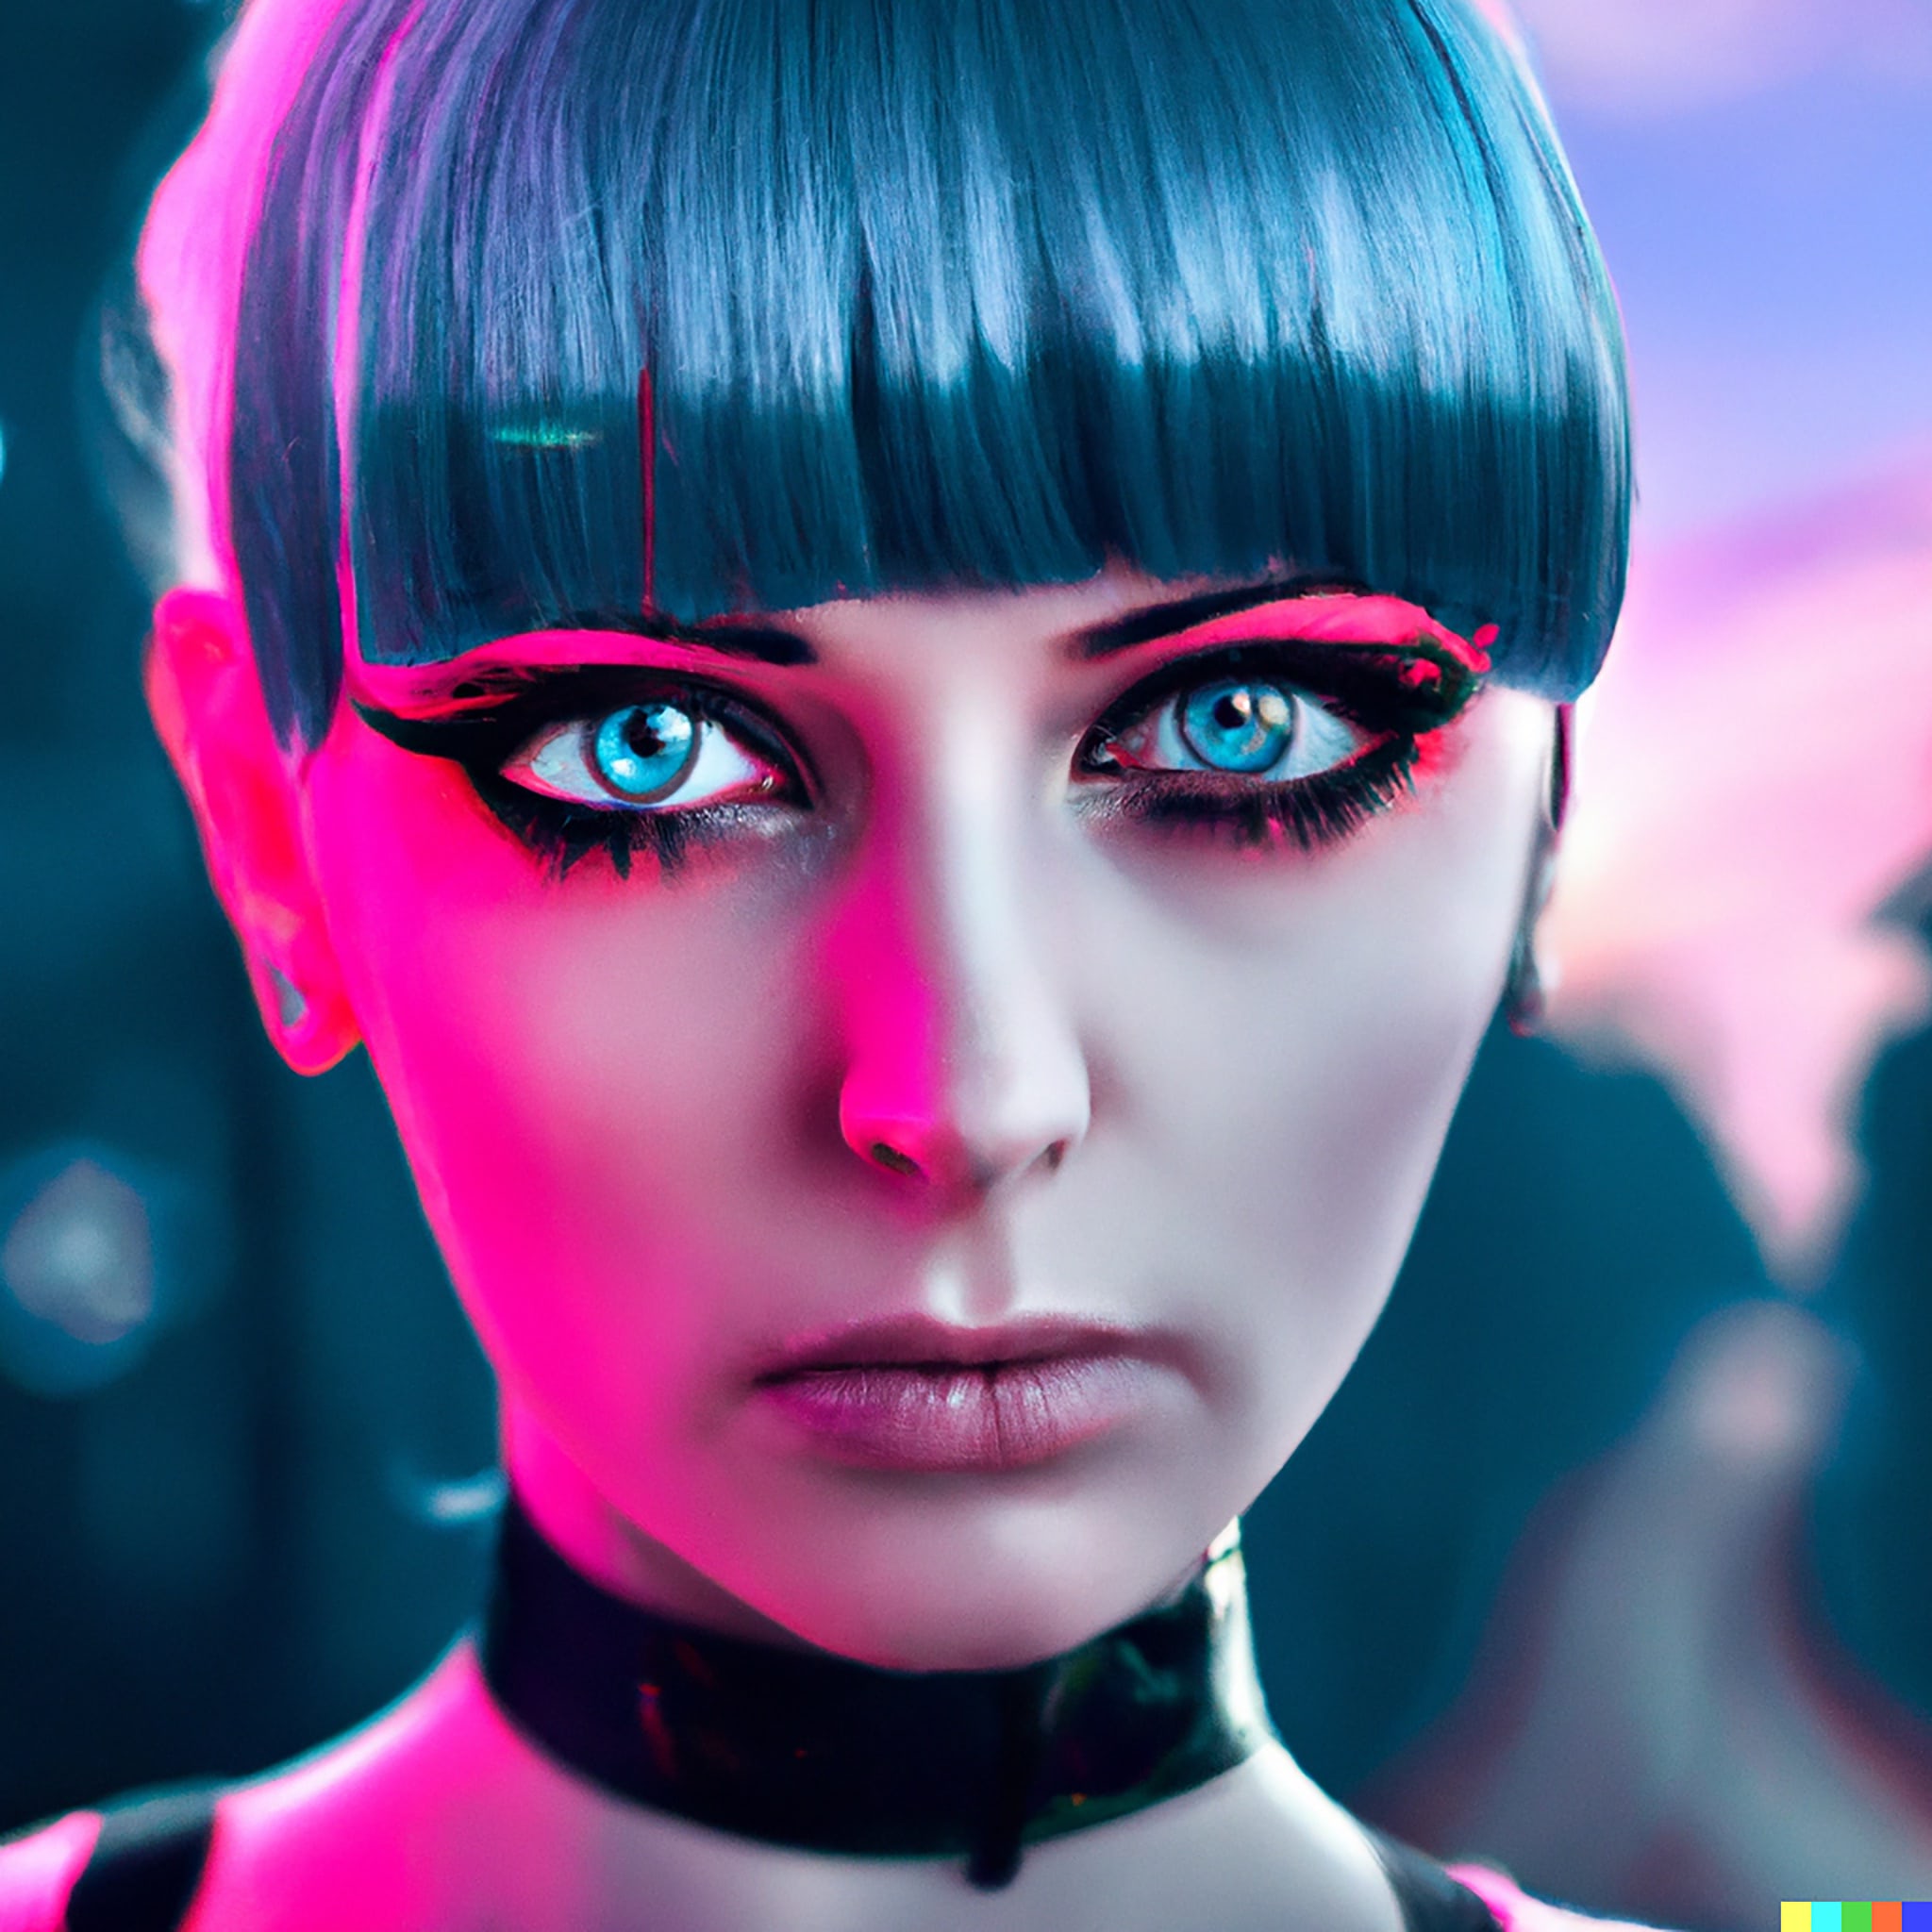 cyberpunk-girl-with-mesmerizing-eyes-and-pink-gray-hair-with-bangs-1